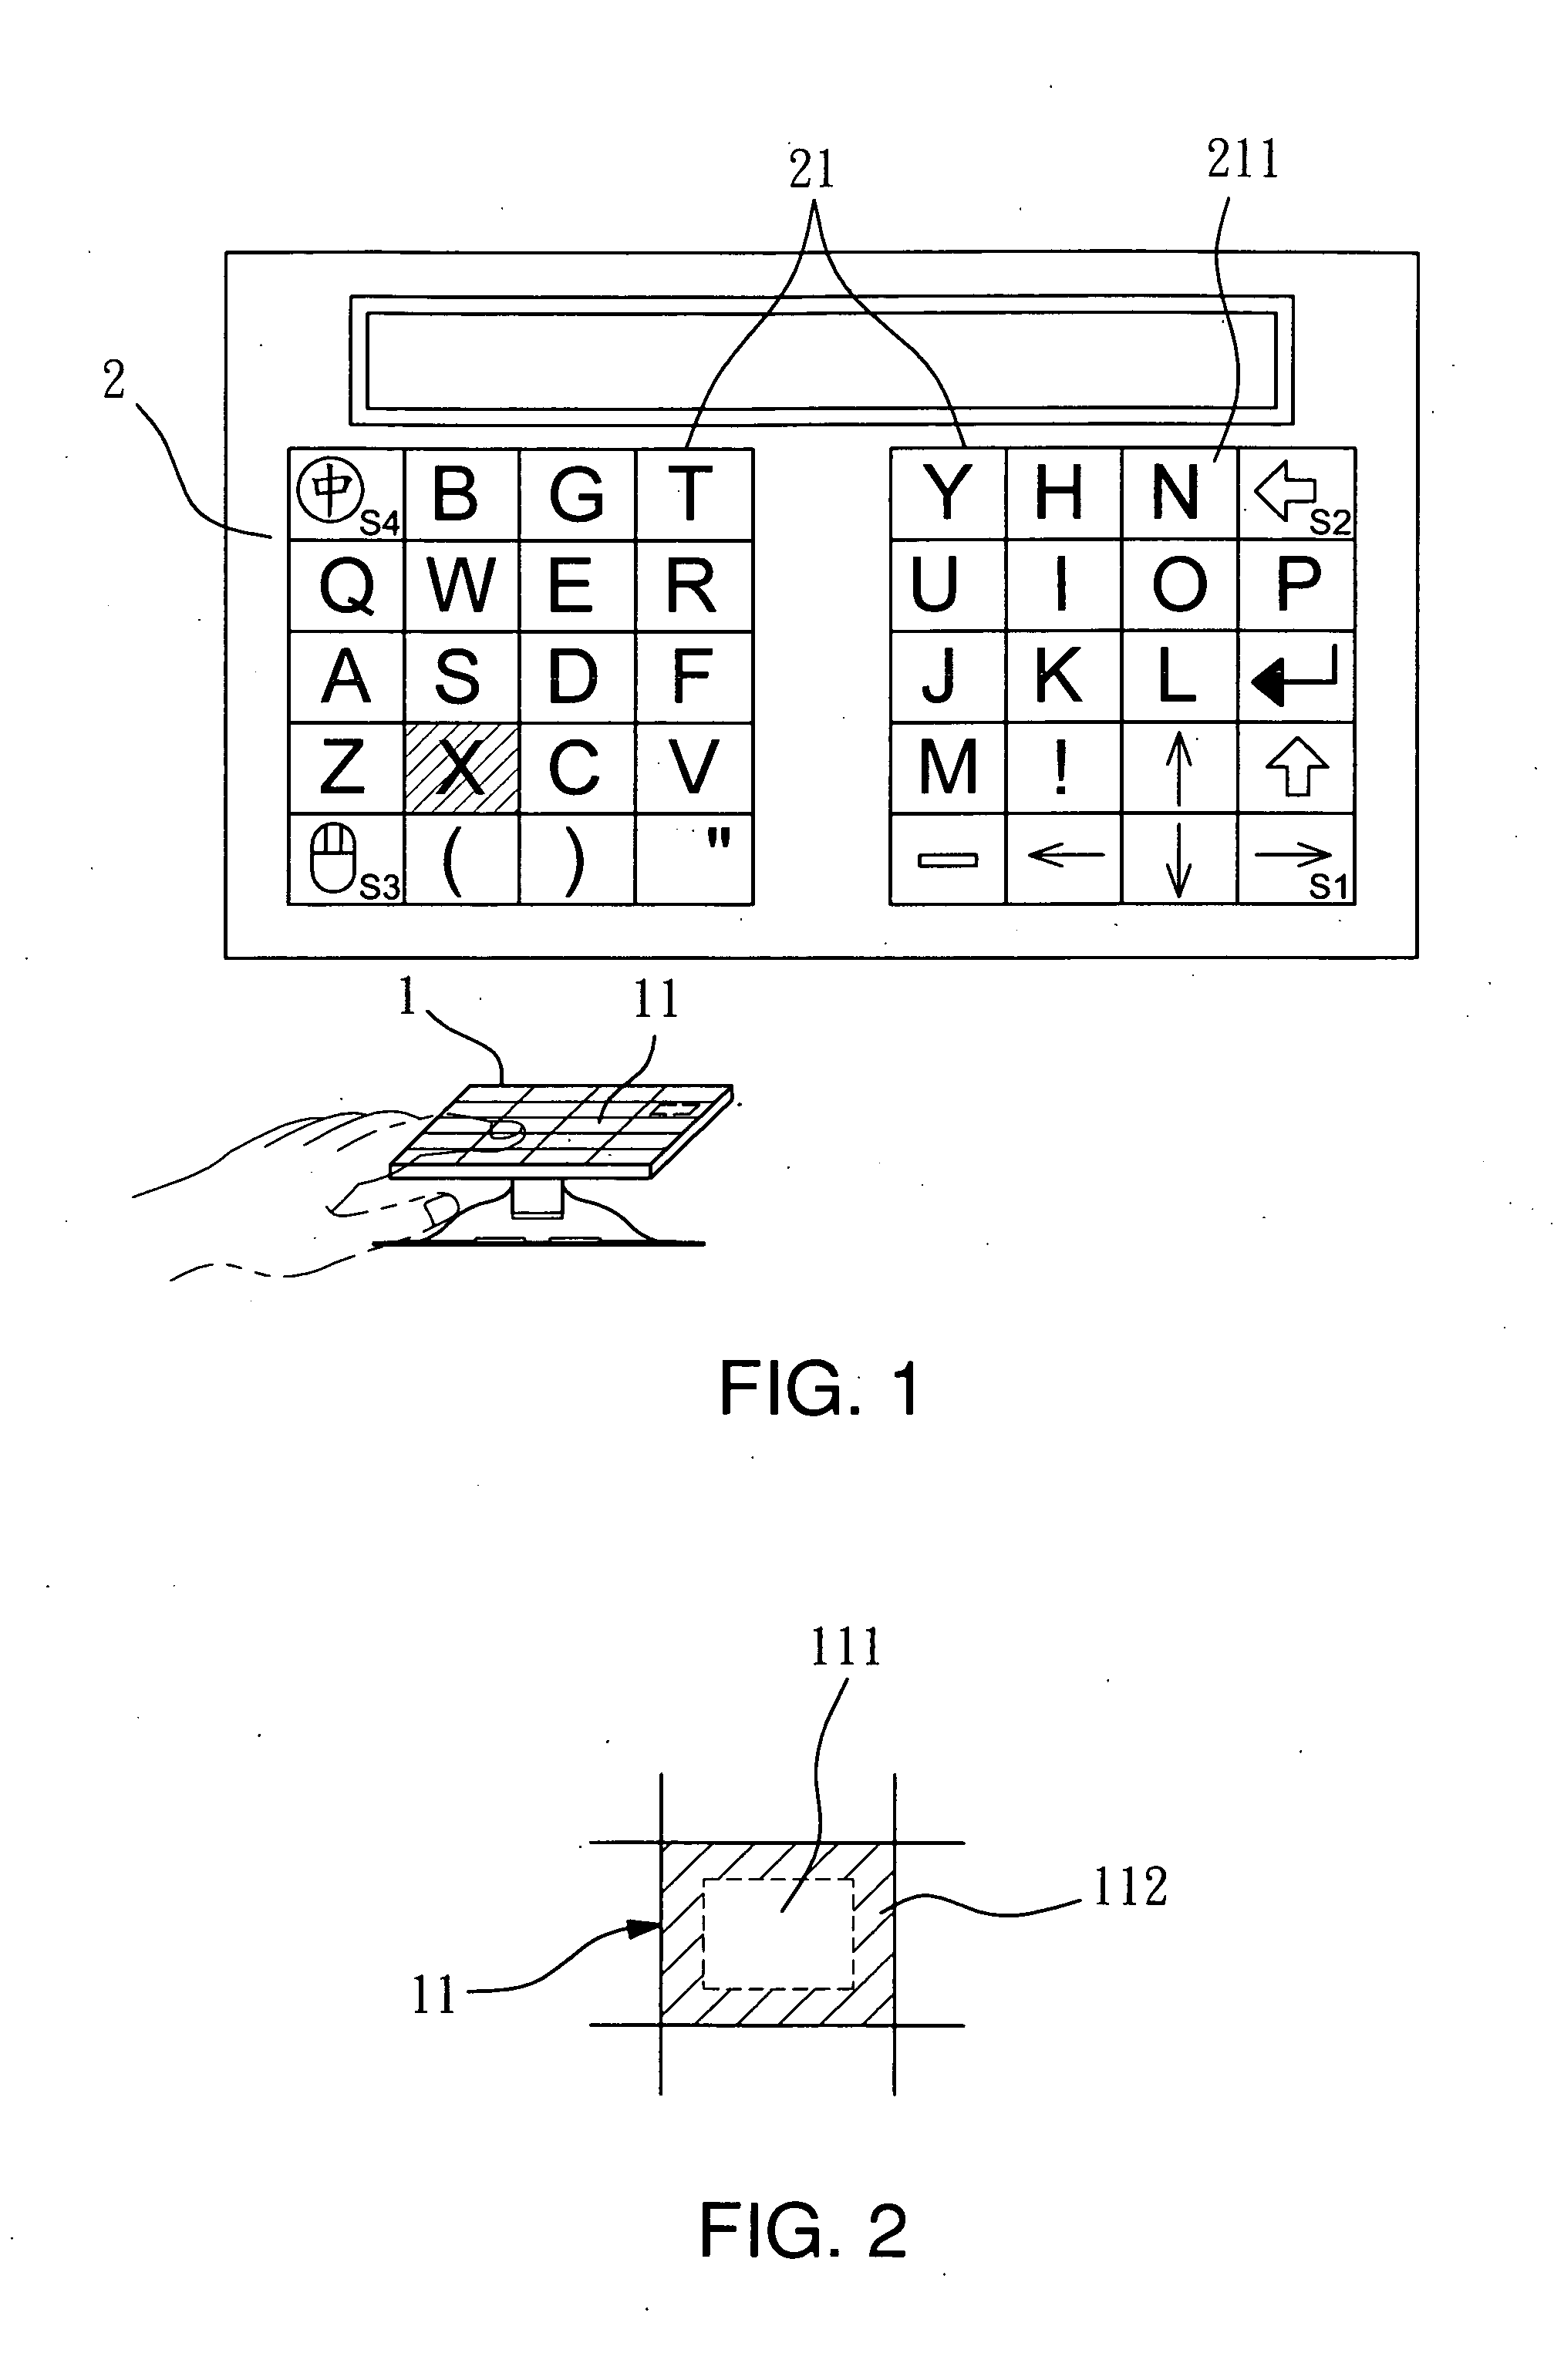 Method for correcting typing errors according to character layout positions on a keyboard